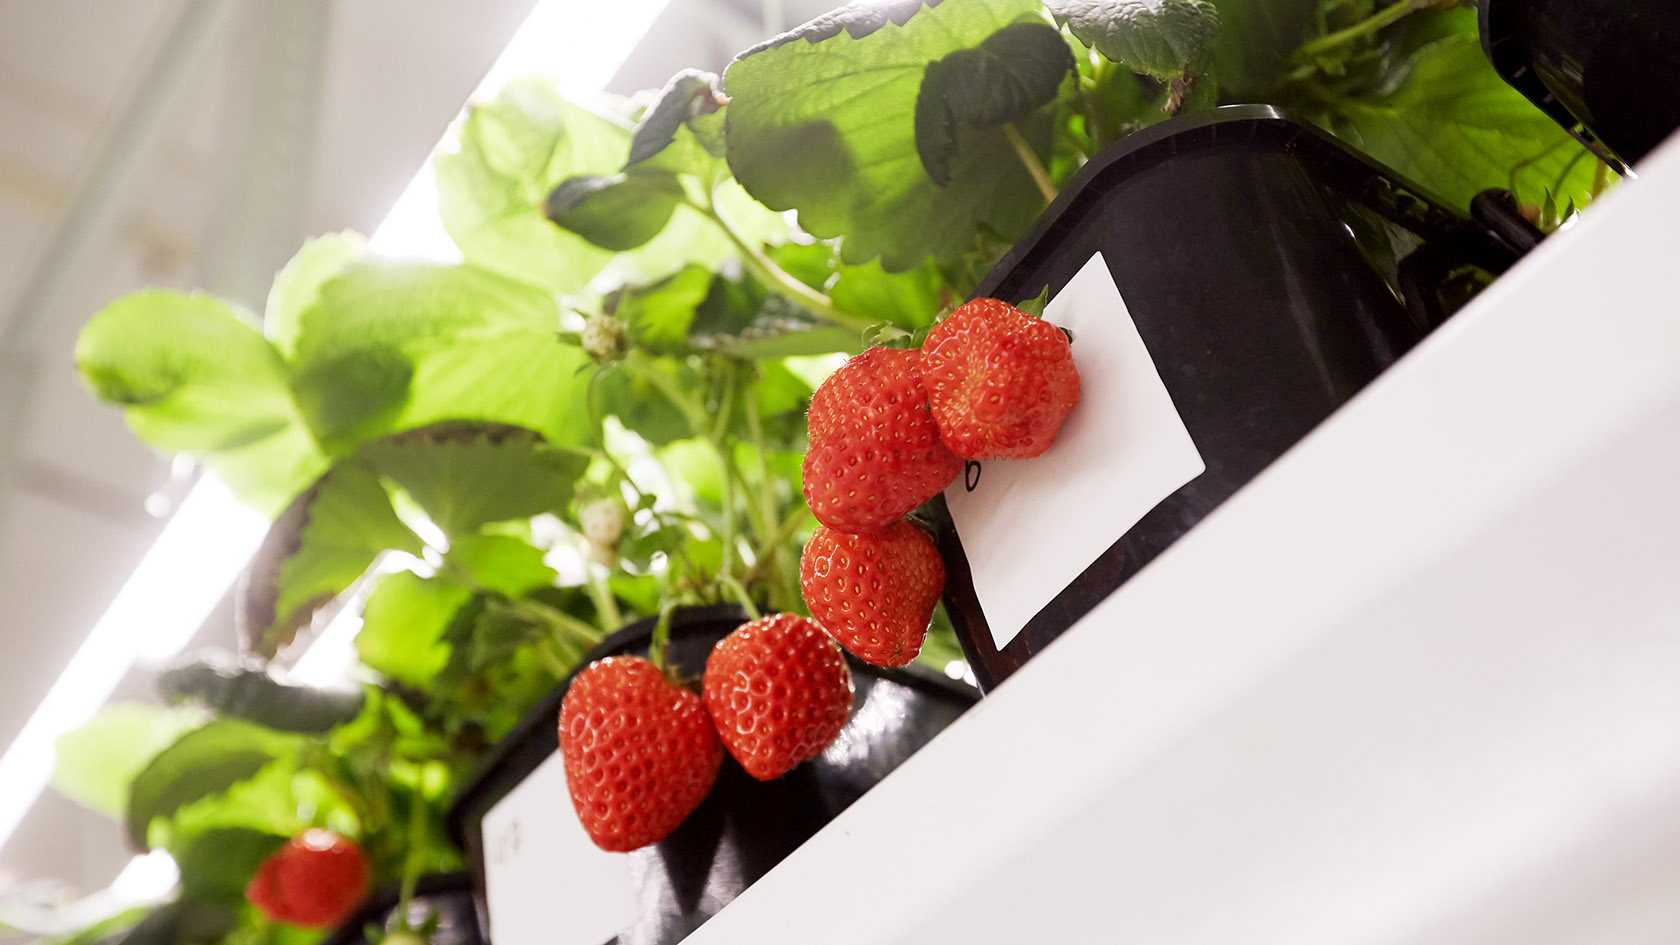 Sweeter and the most delicious: we are making researches of strawberry